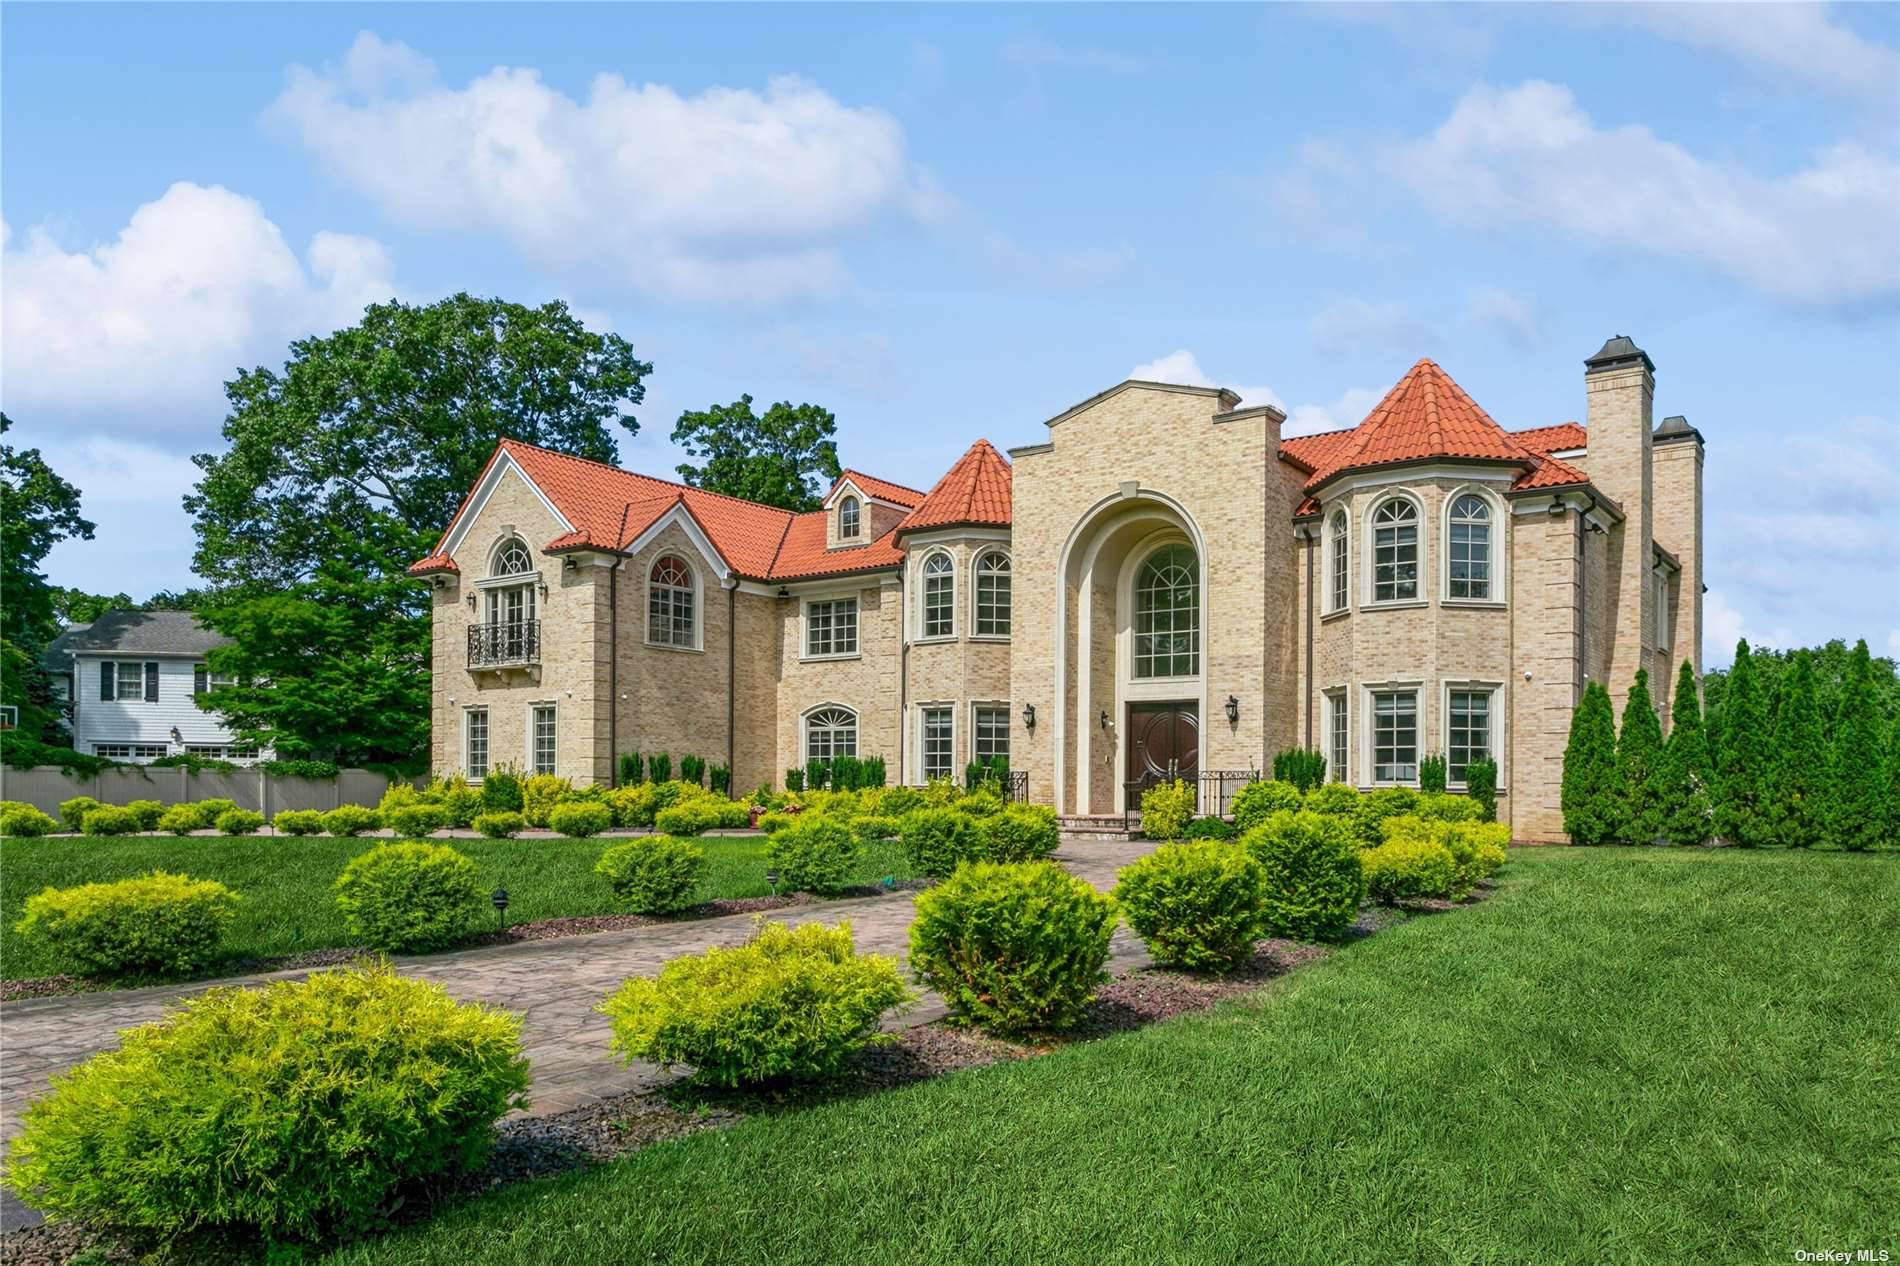 Experience the grandeur of this exquisite, newly constructed 11 bedroom contemporary colonial brick mansion.